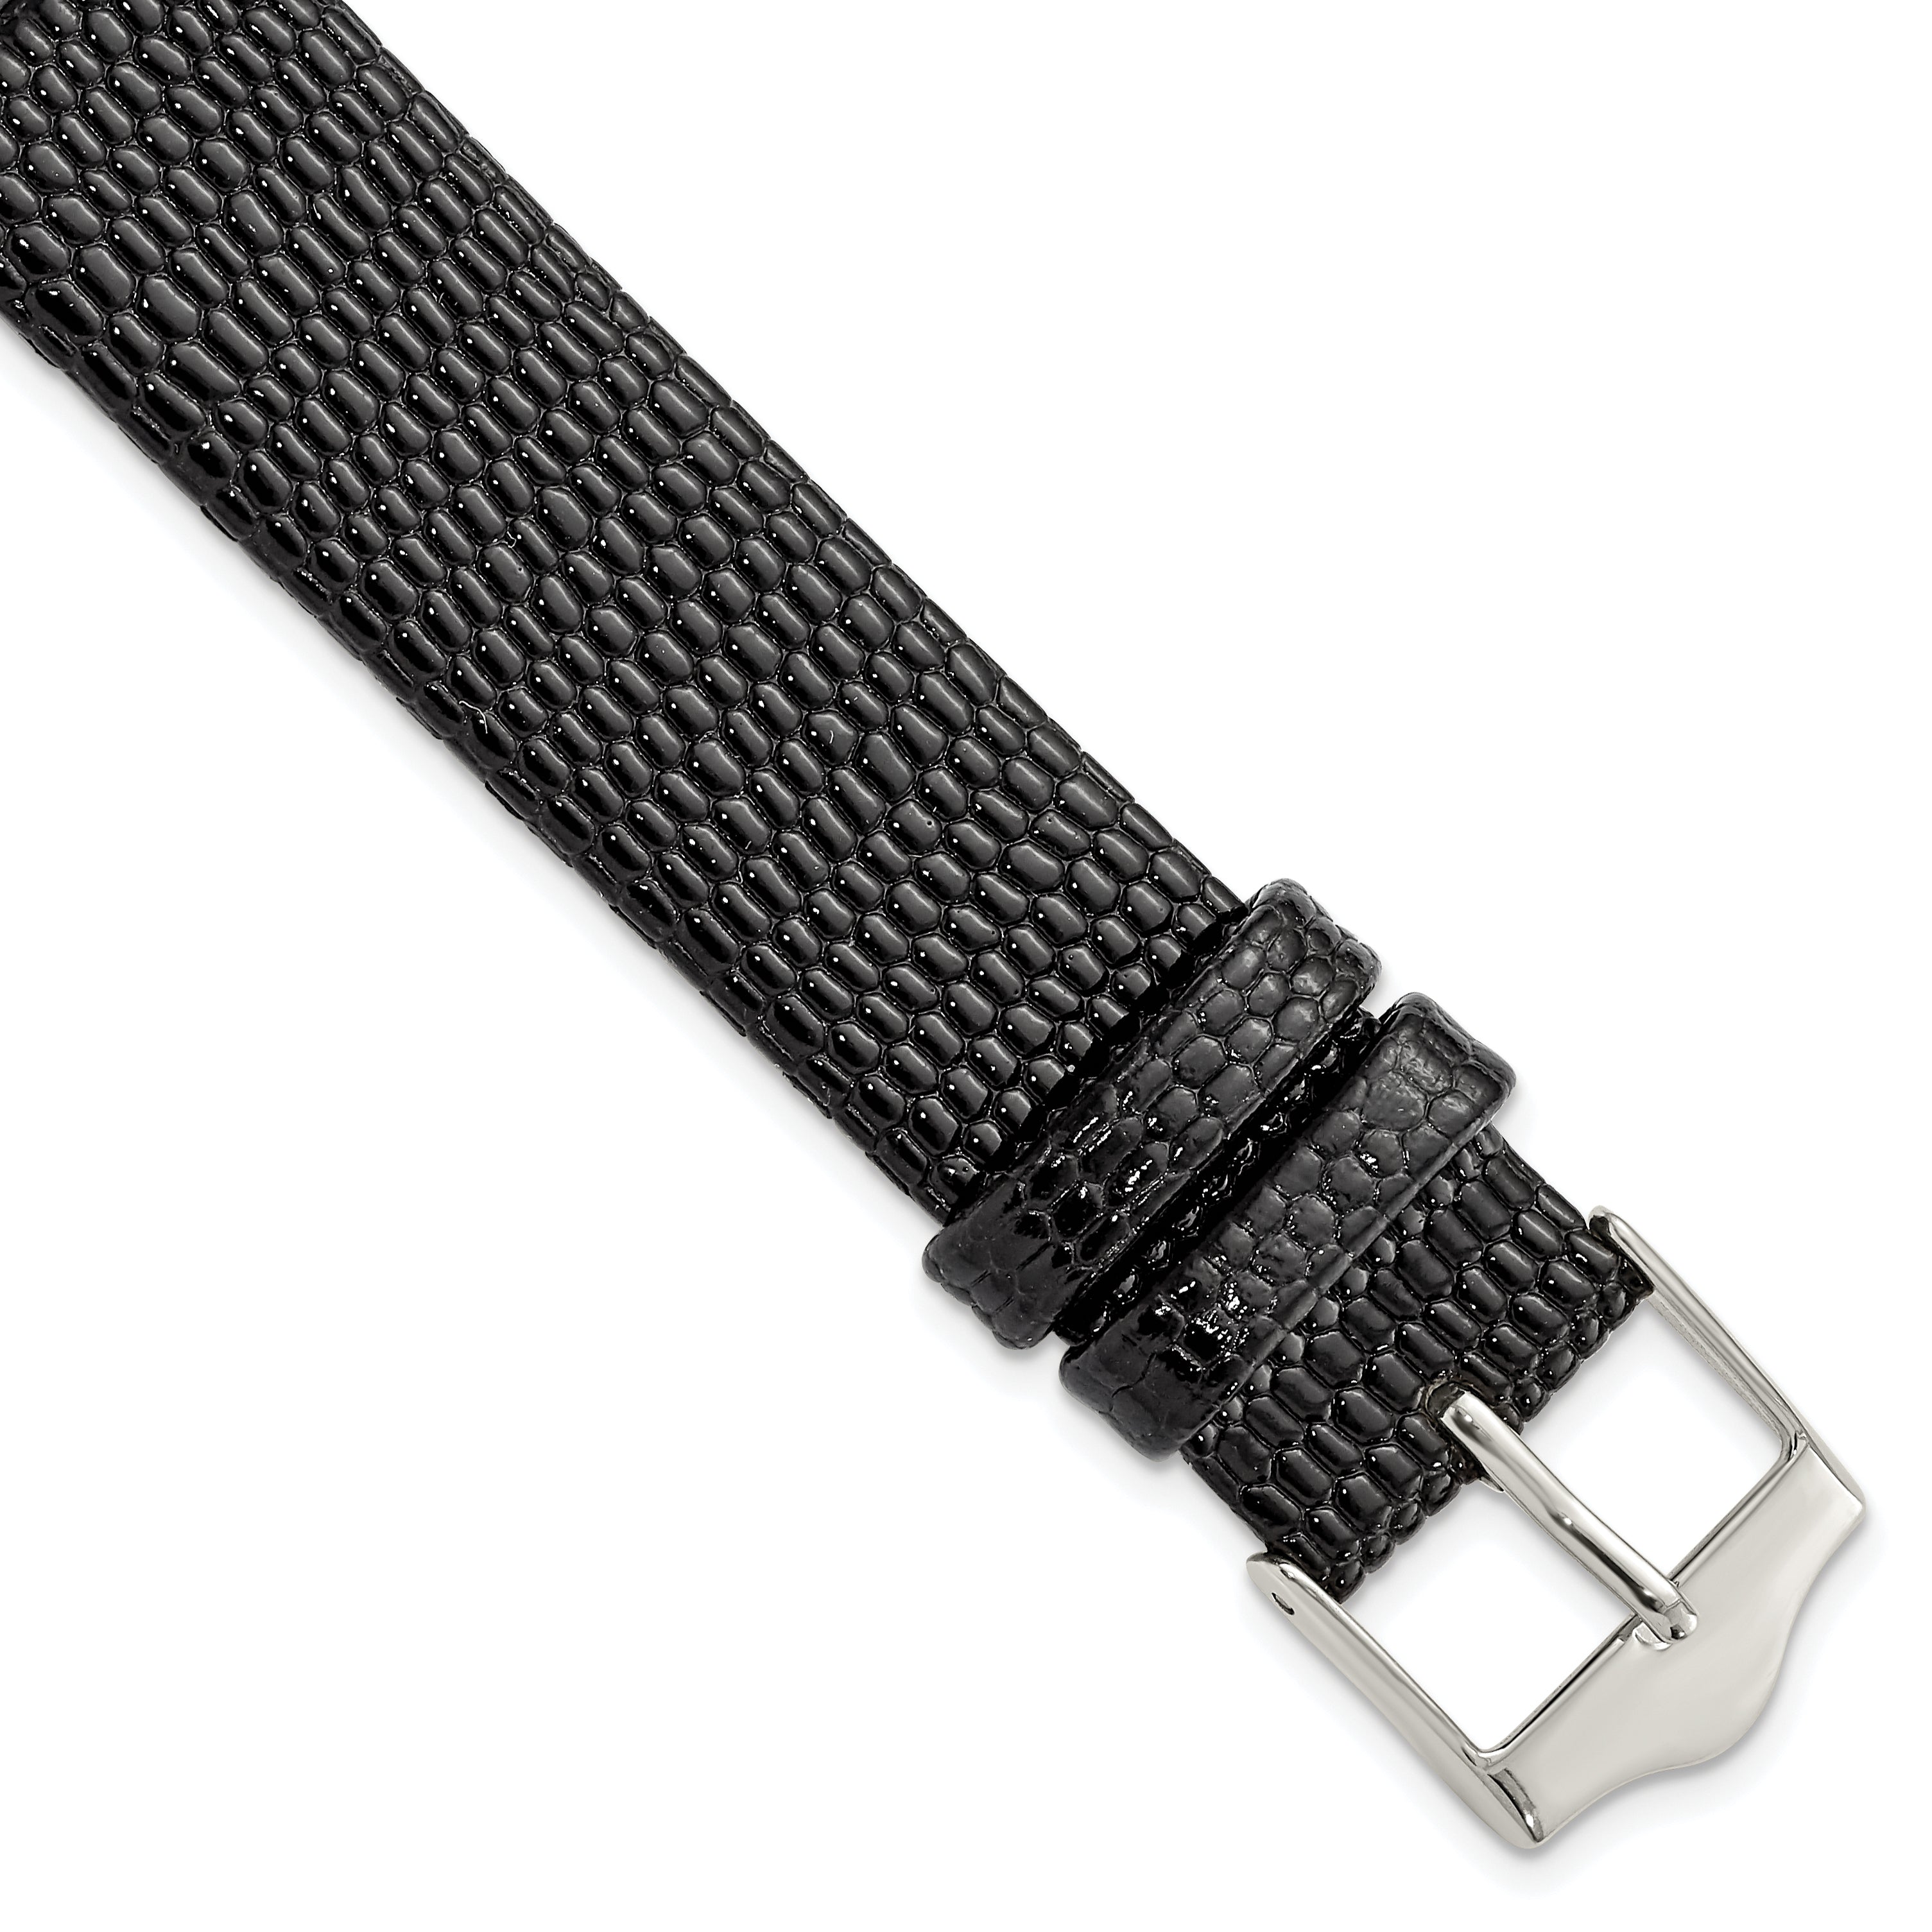 DeBeer 17mm Flat Black Lizard Grain Leather with Silver-tone Buckle 7.5 inch Watch Band